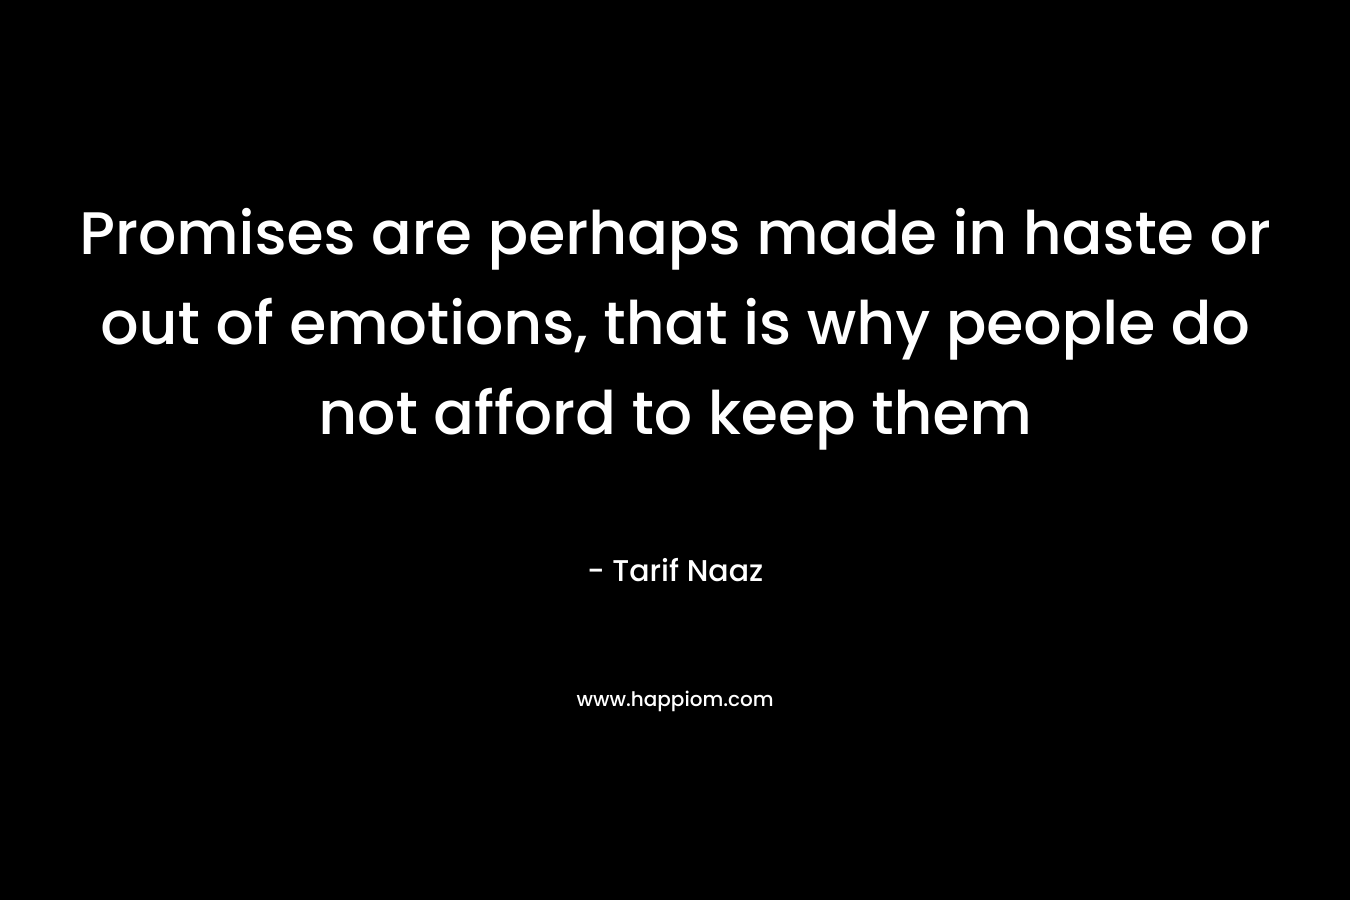 Promises are perhaps made in haste or out of emotions, that is why people do not afford to keep them – Tarif Naaz